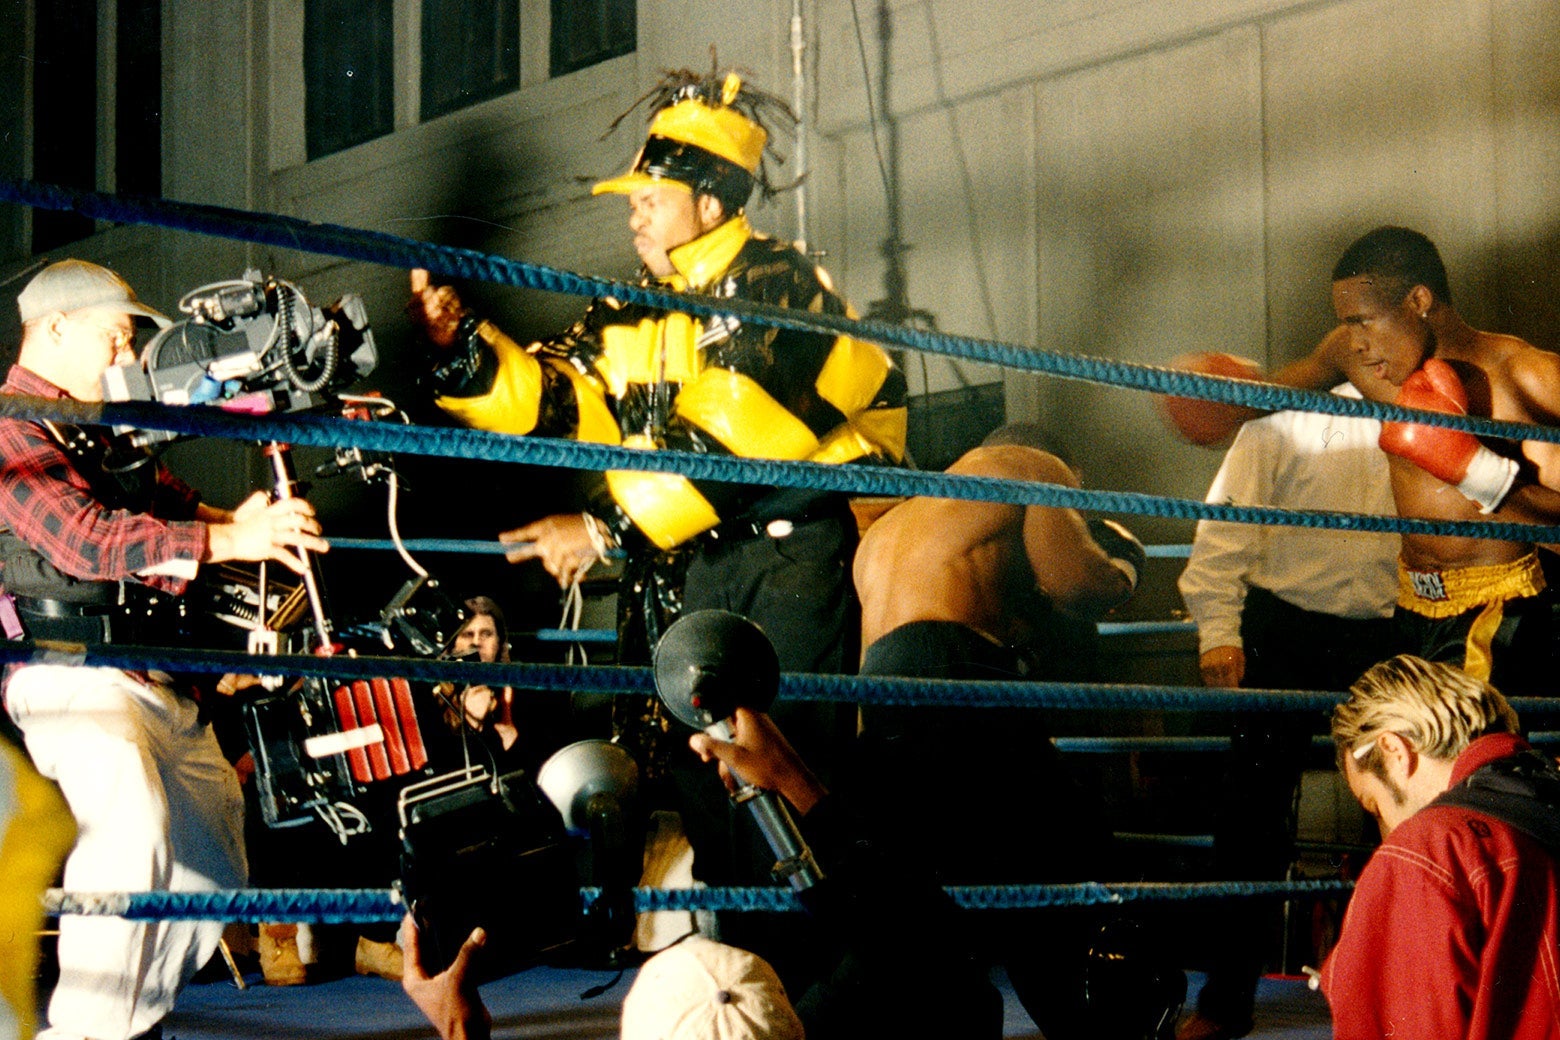 Busta Rhymes, in a shiny yellow coat, films his part for the "Rumble In the Jungle" video.